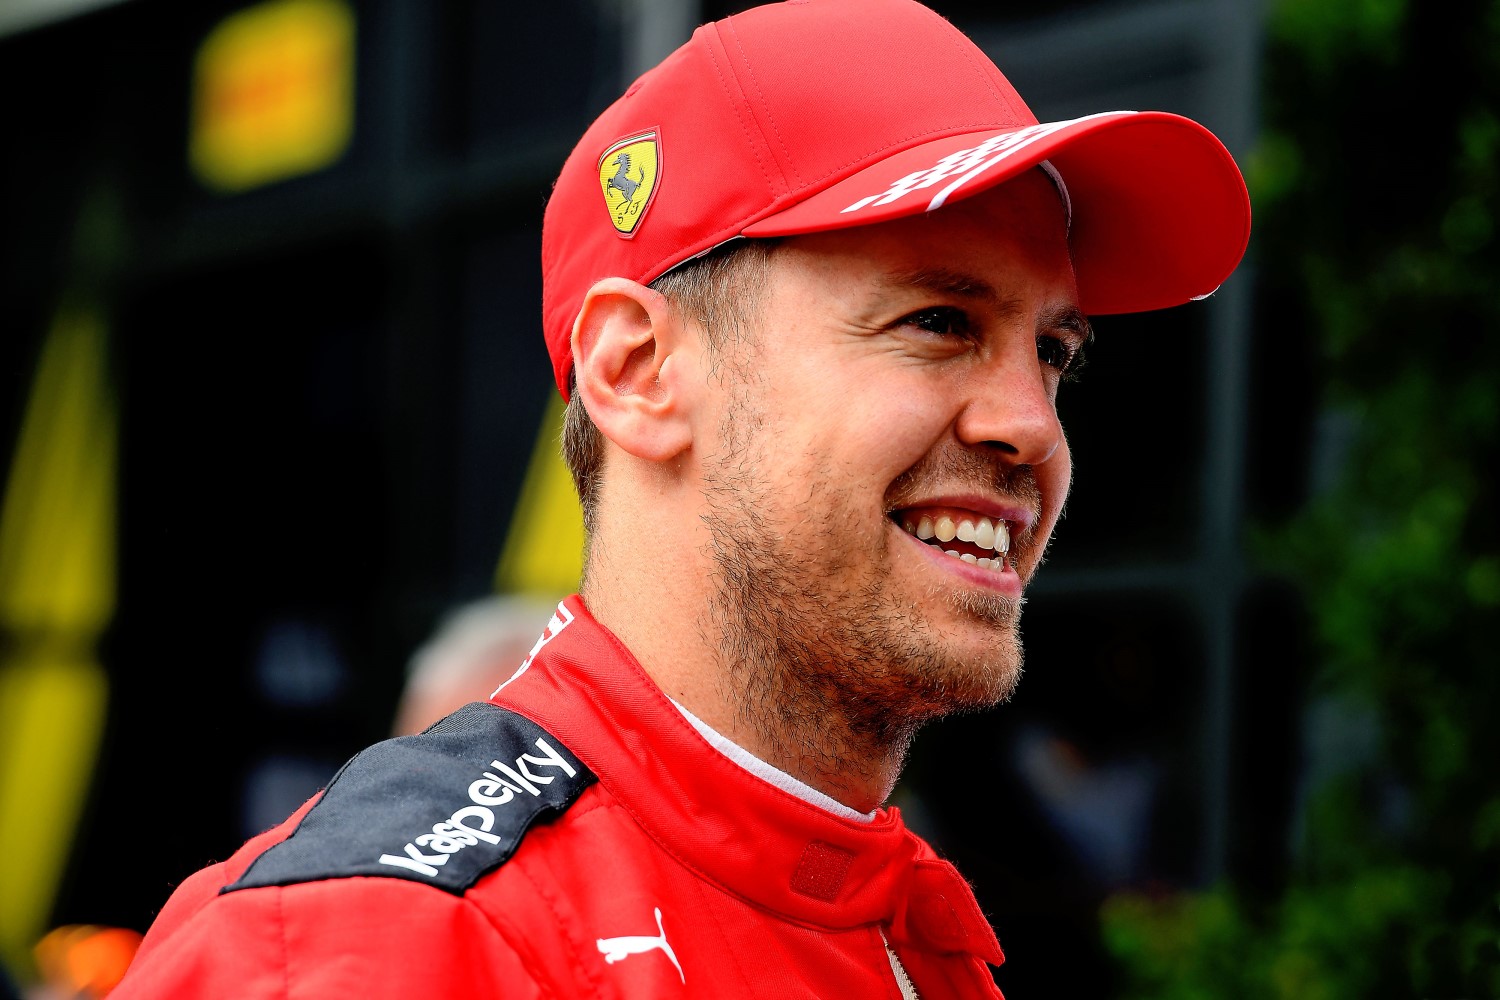 Vettel should stay at Ferrari all year and collect every time of his reported $30 million+ contract. Grin and bear it while smiling all the way to the bank.